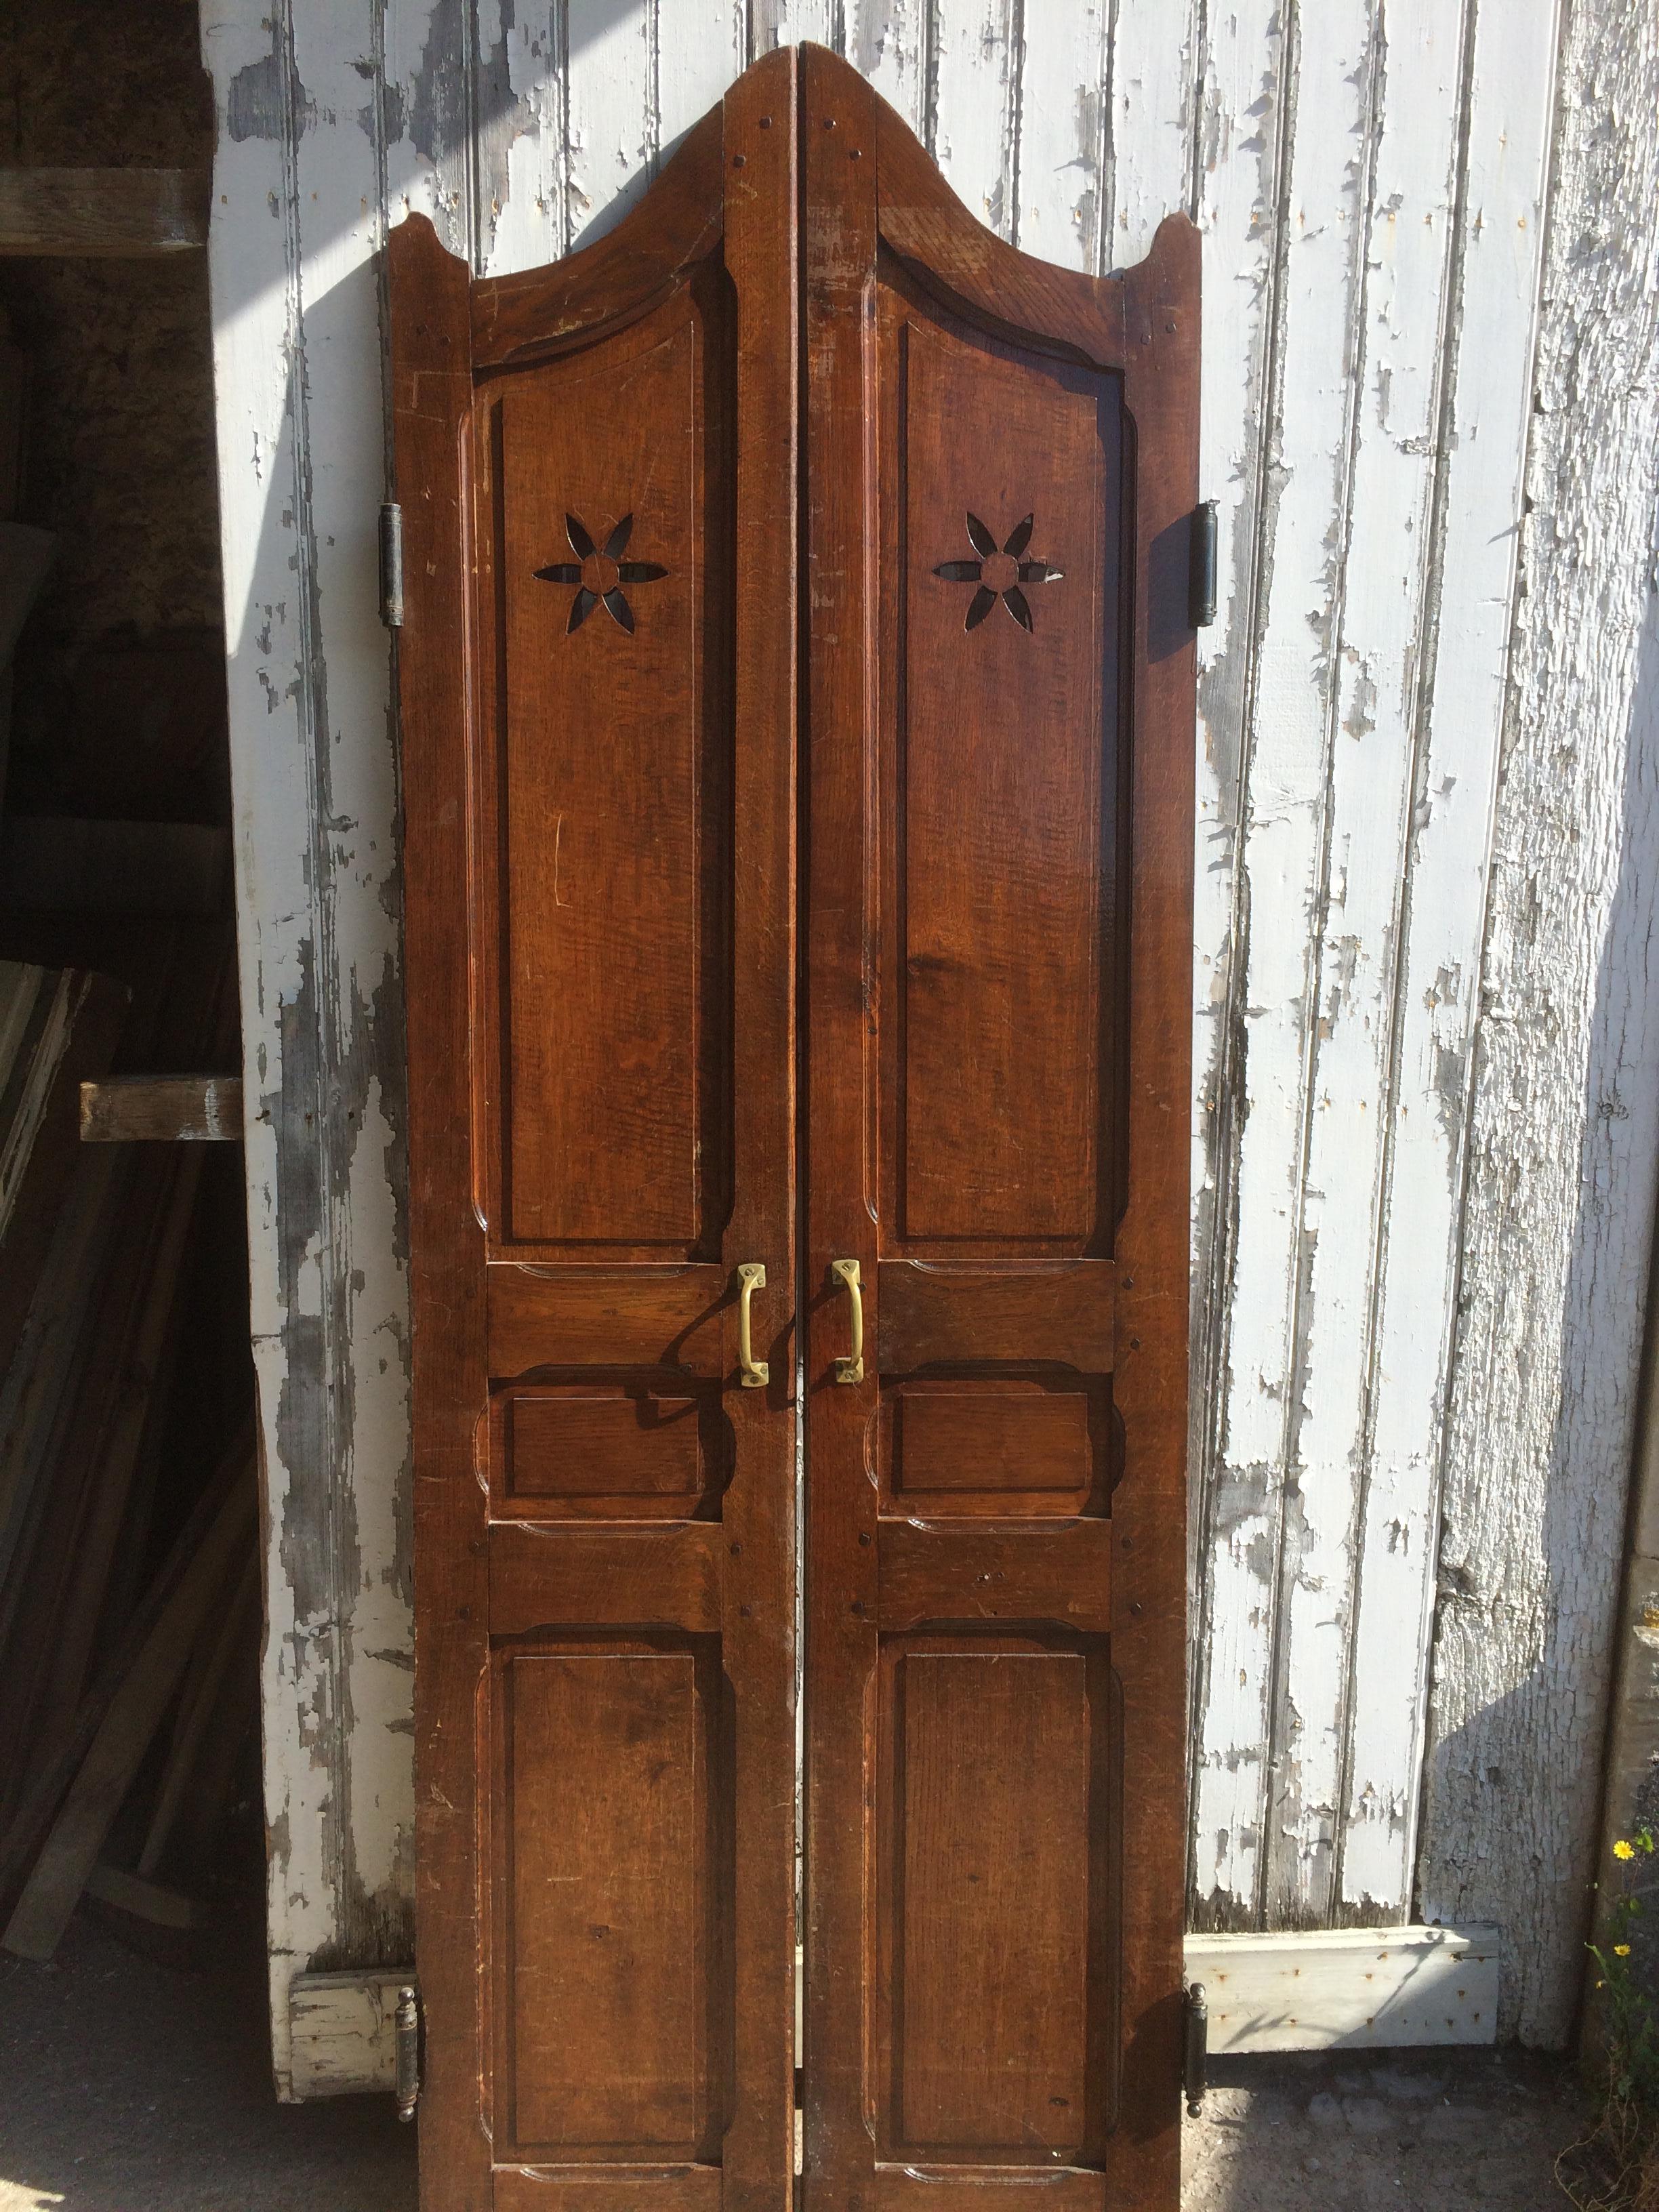 A pair of French antique solid wood door from 19th century in France.
Great quality of art work, ready for installation.
Available right now from our location in Los Angeles.
More info on demand.
